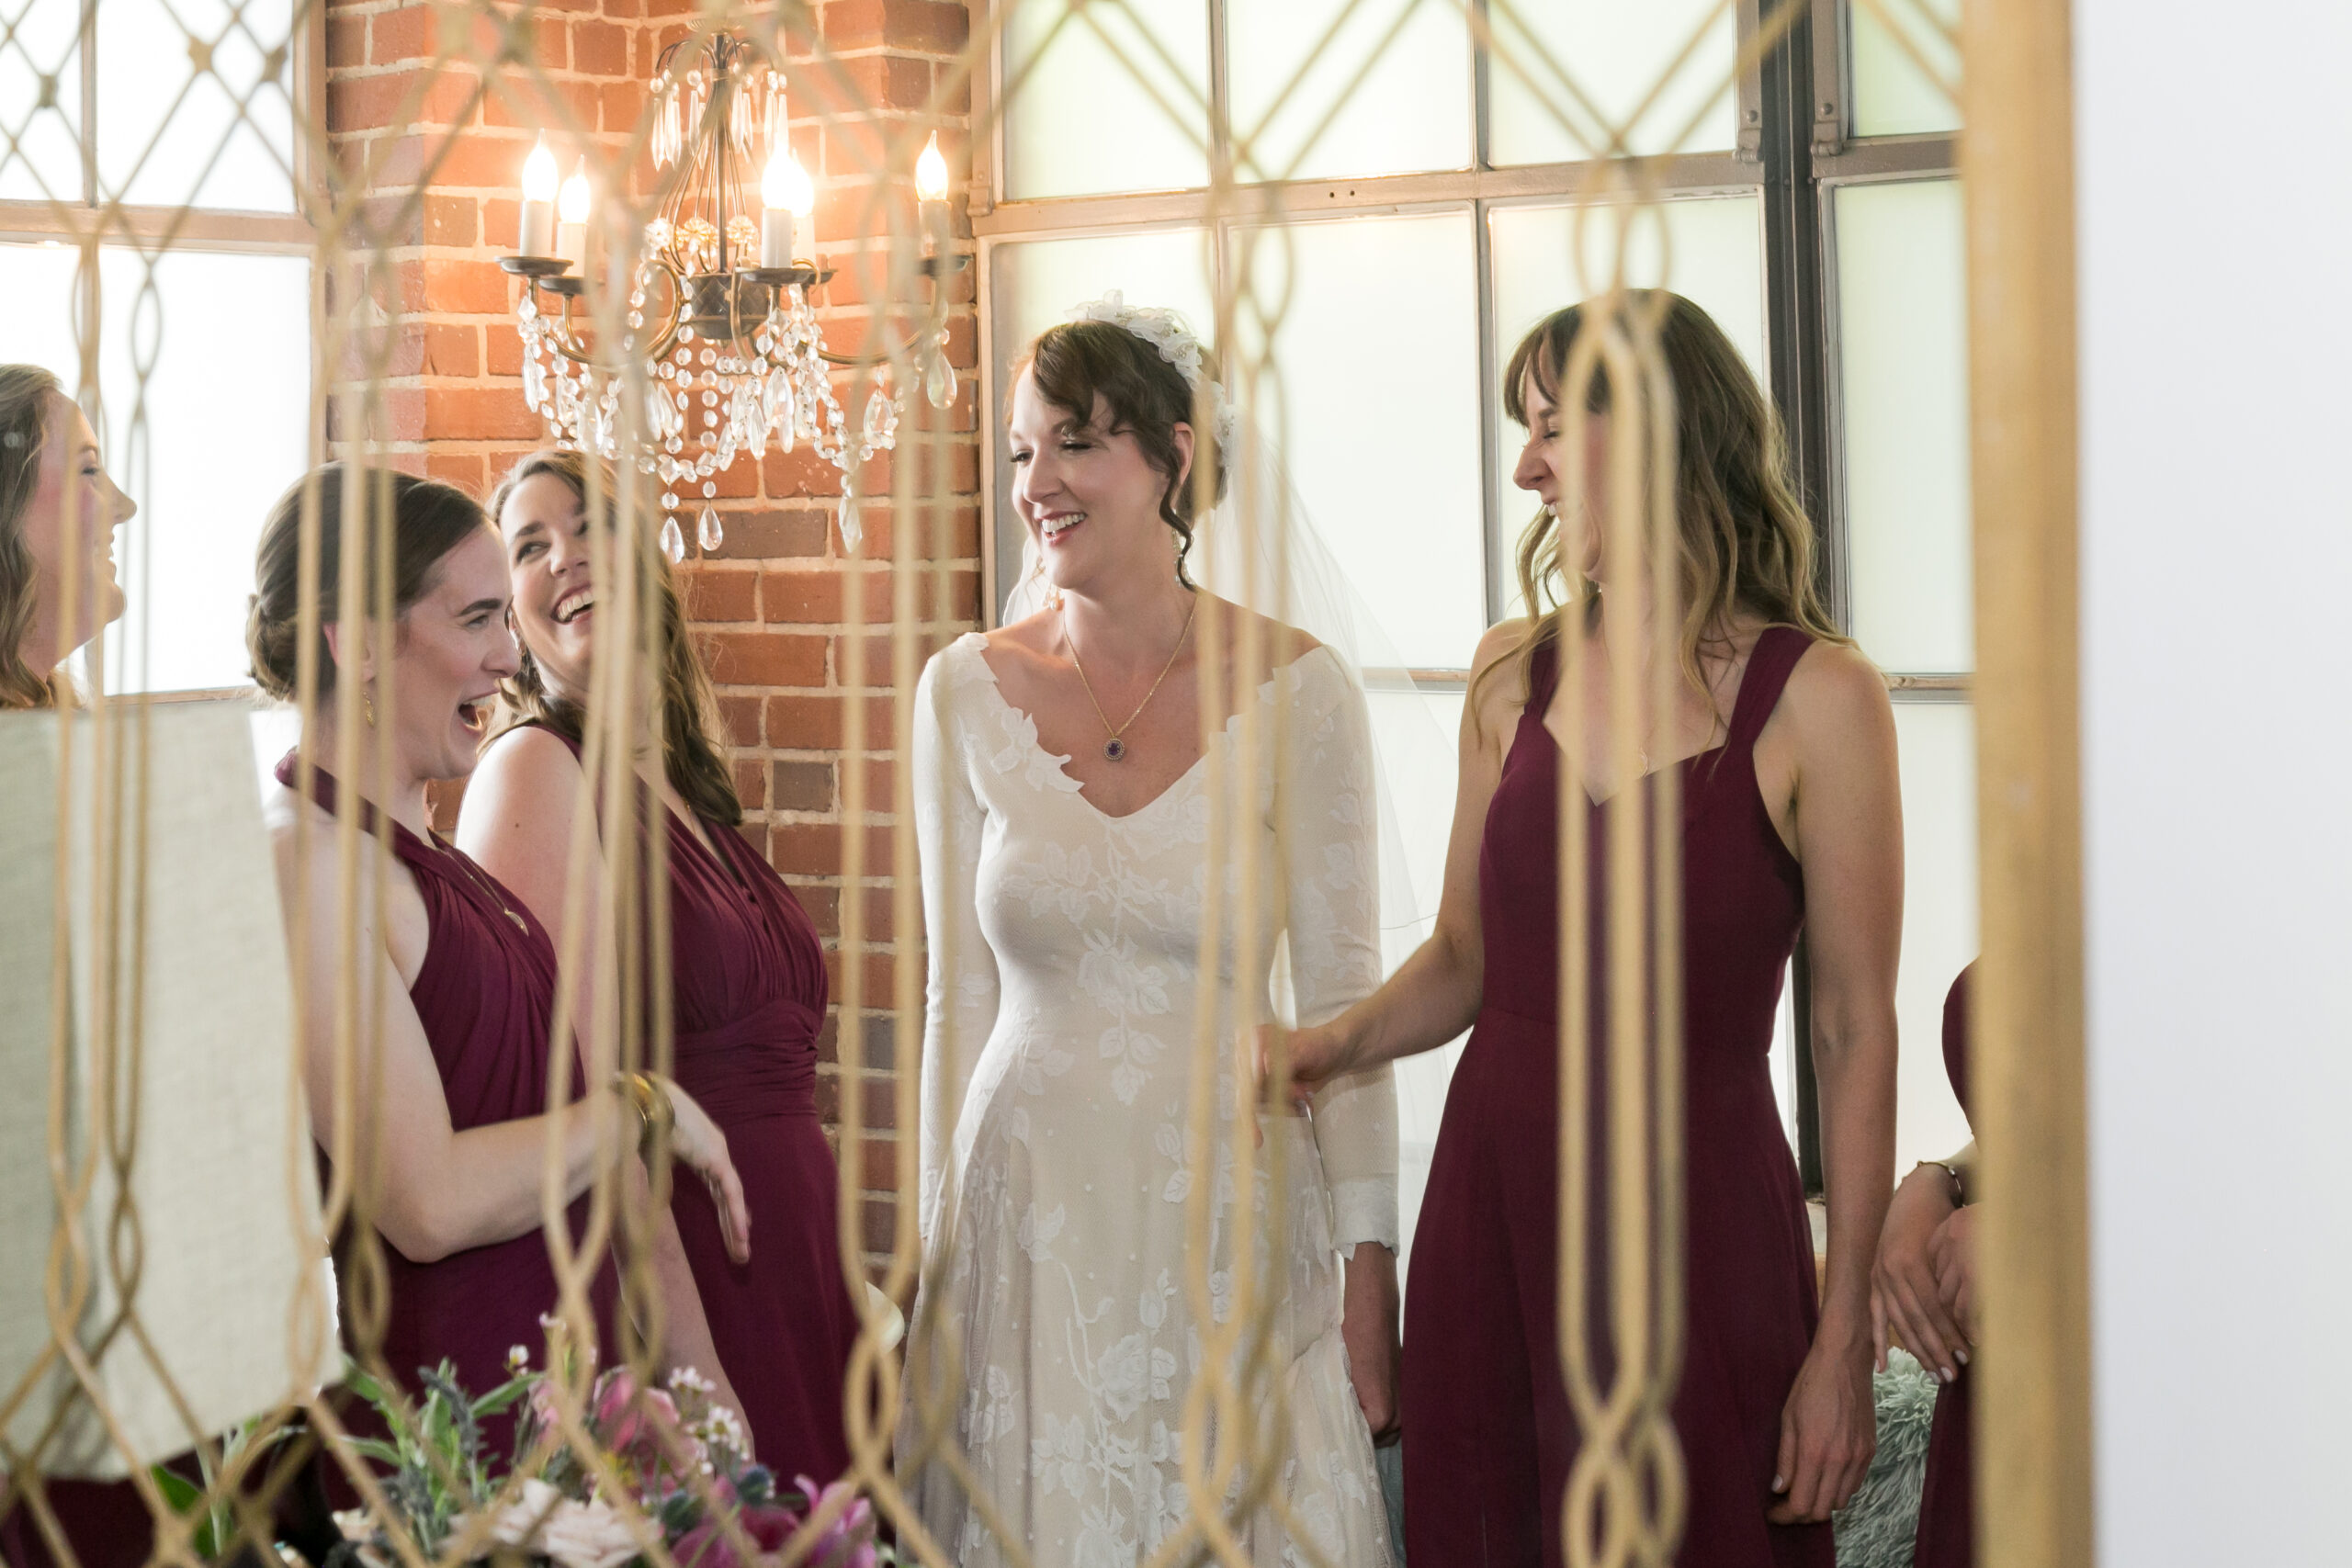 A reflection in a mirror shows a bride laughing with her bridesmaids.